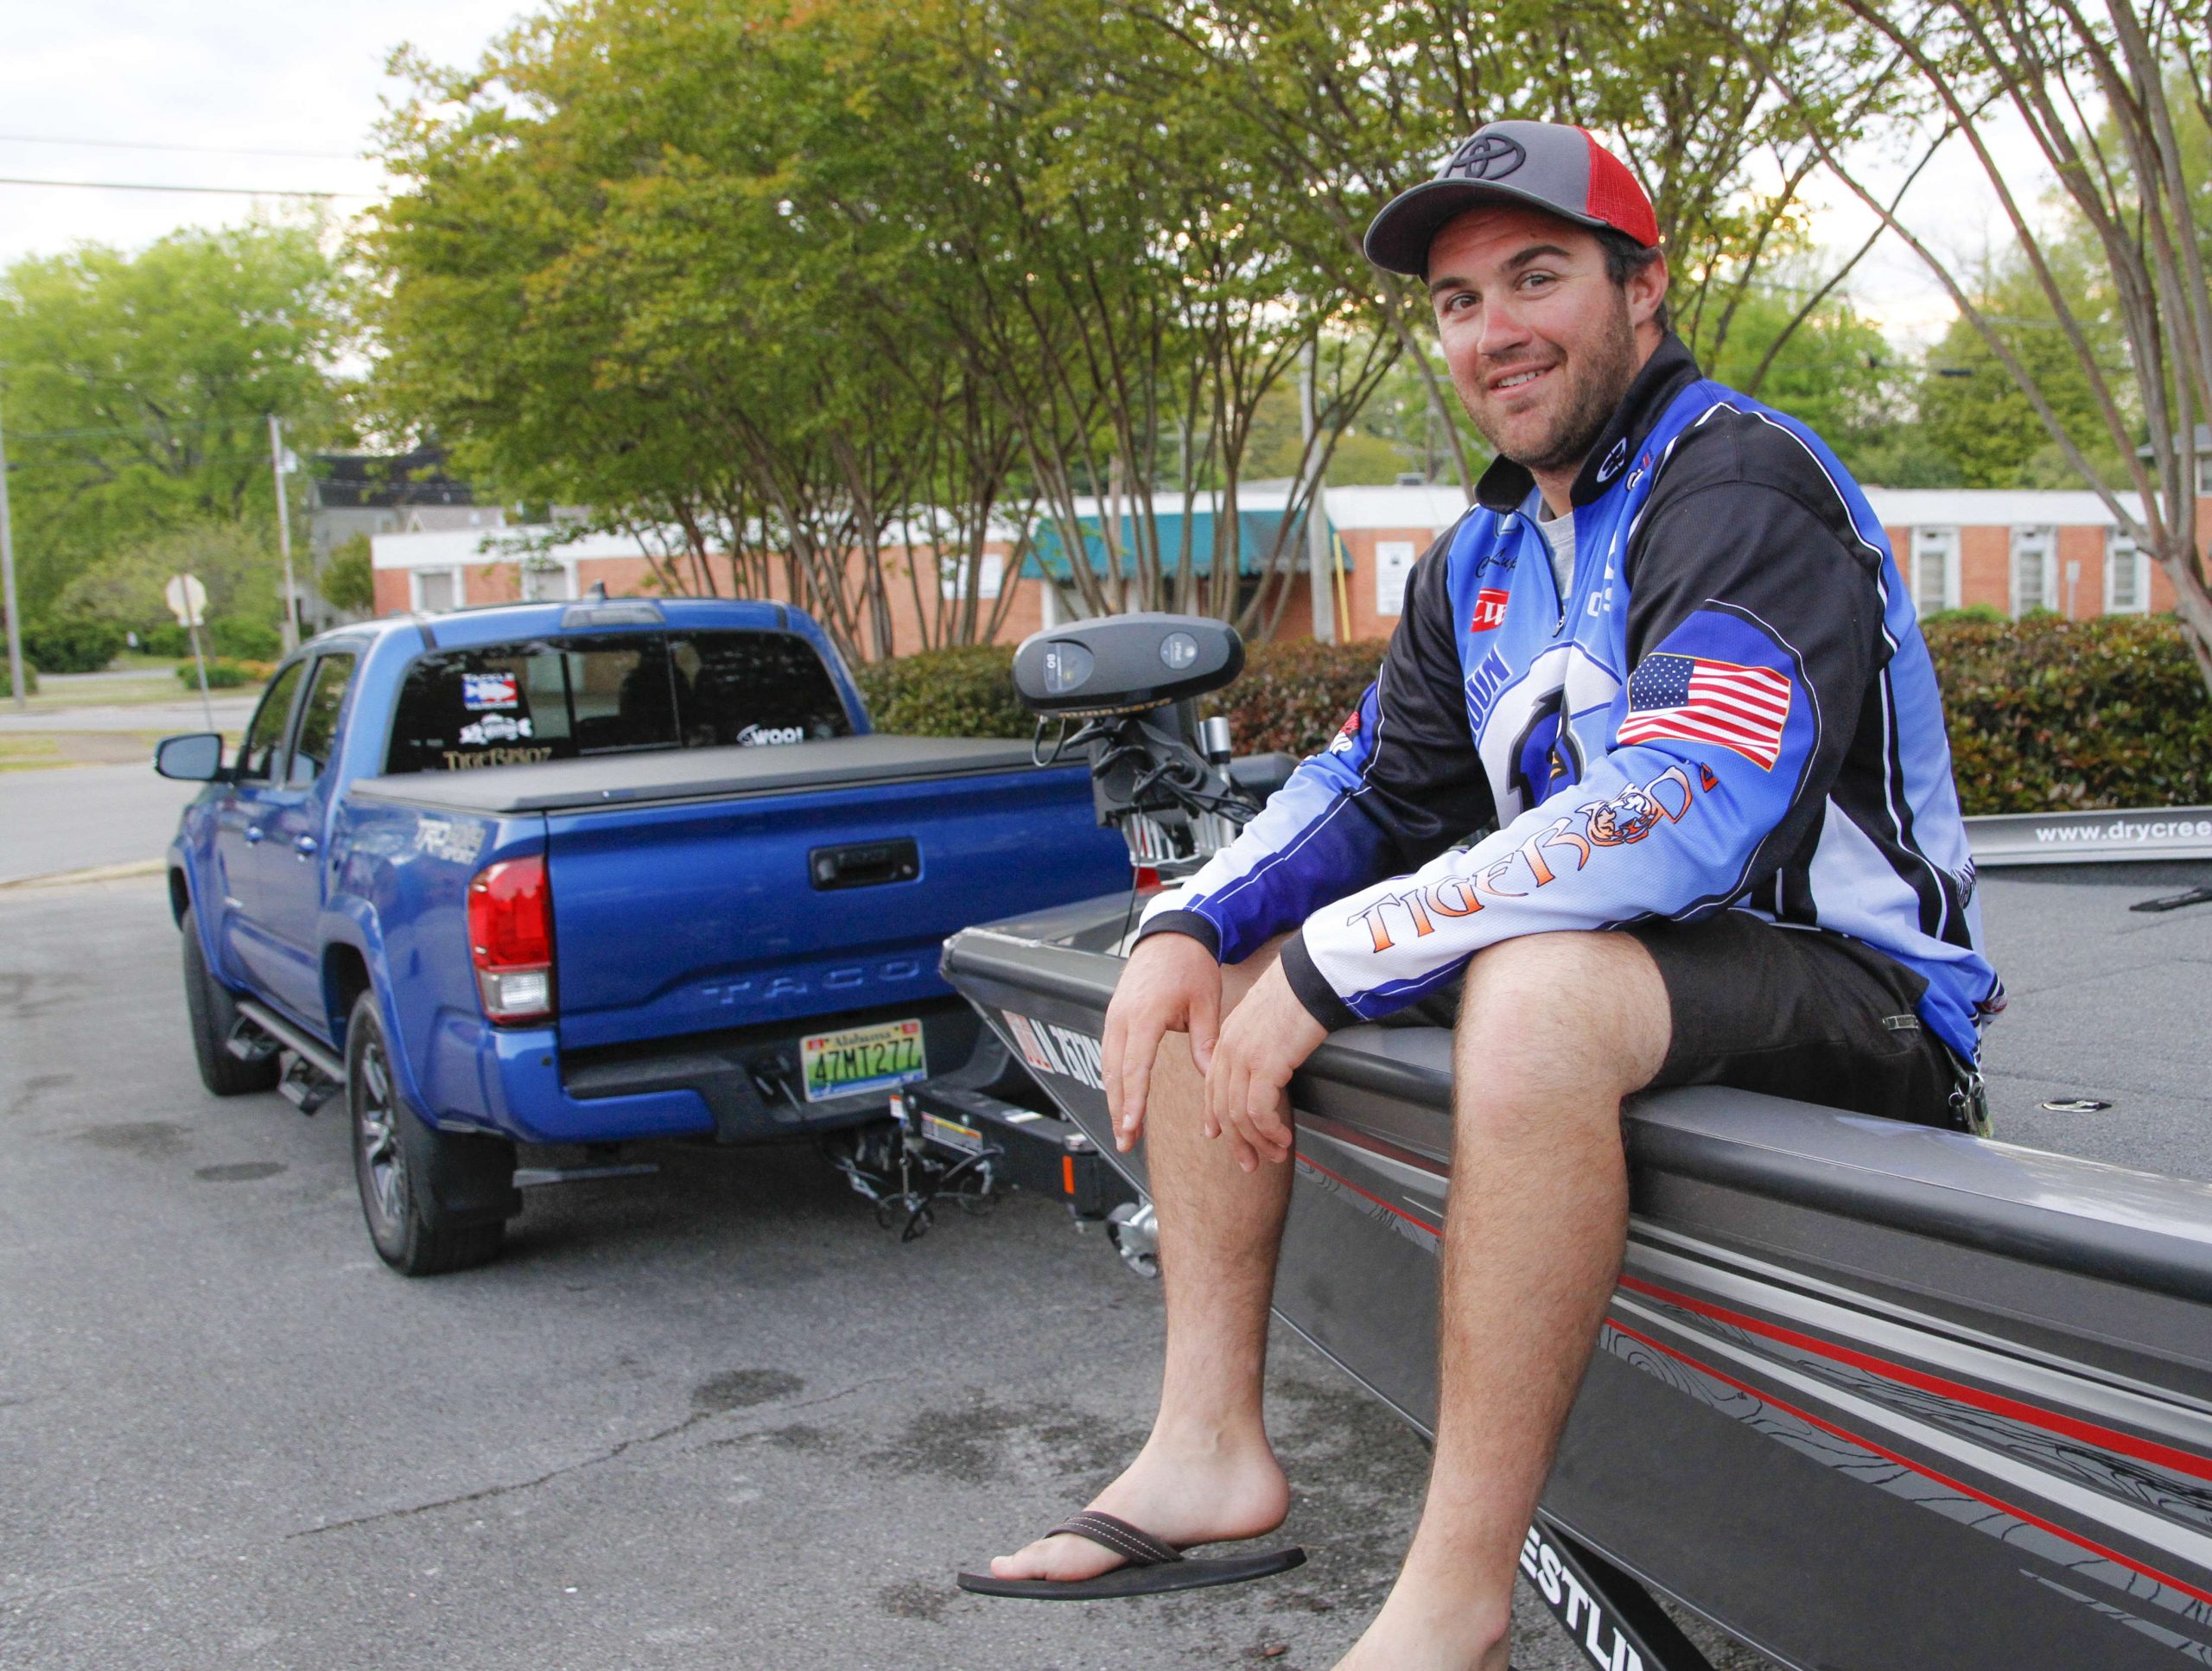 Lupo loves that everyone can fish for bass, but itâs not easy to be great at it. âFishing is a puzzle that involves a scavenger hunt to find all the right pieces that fit together to create your pattern on how to catch the fish,â he said. âPlus, the feeling that comes from landing that big fish on tournament days.â
